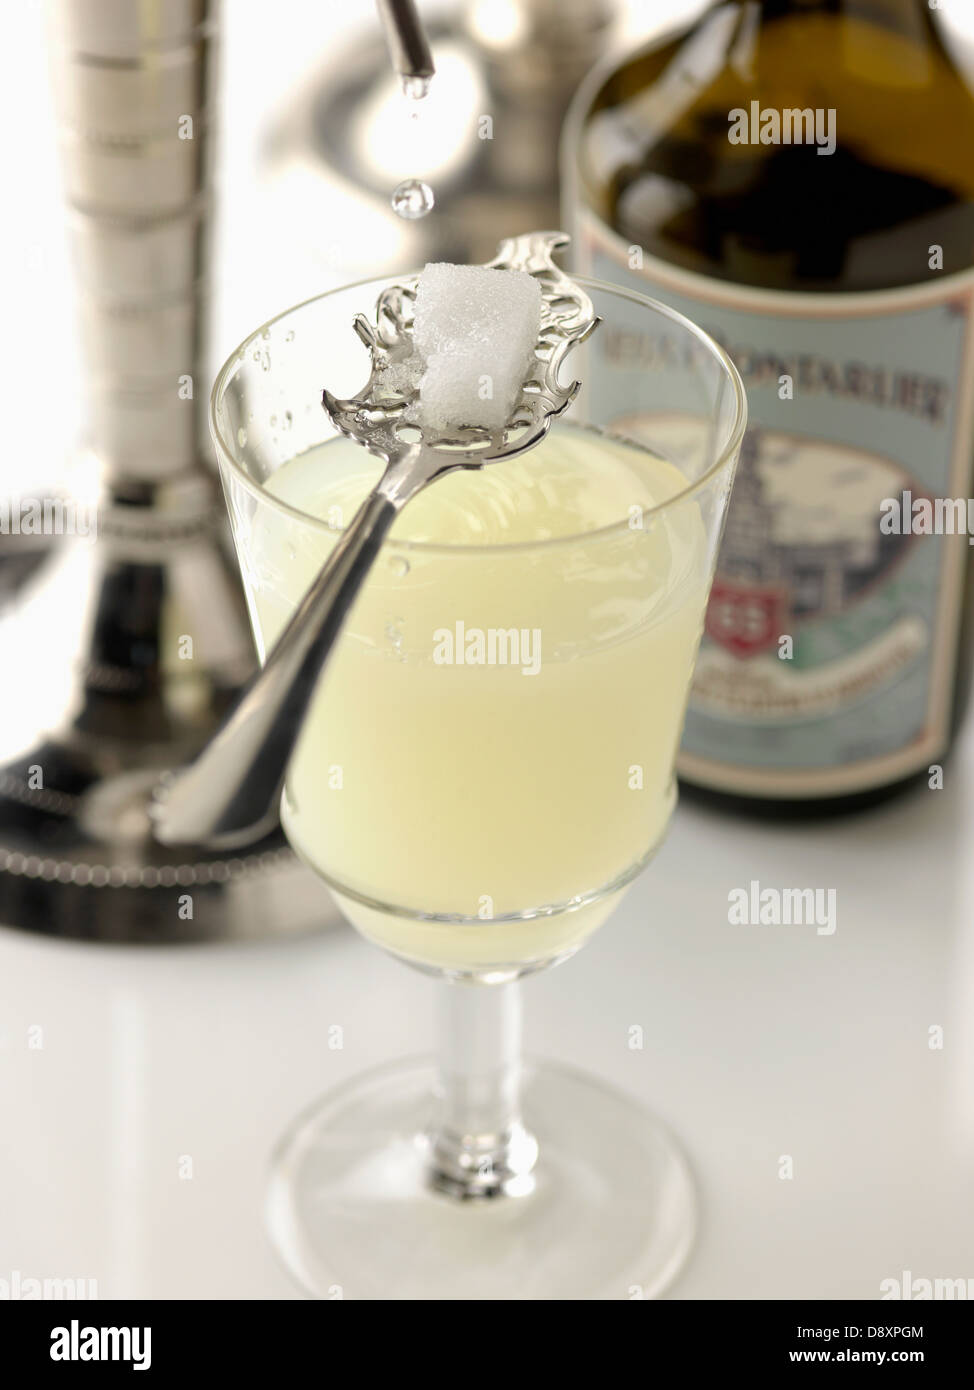 Serving a glass of Absinthe Stock Photo